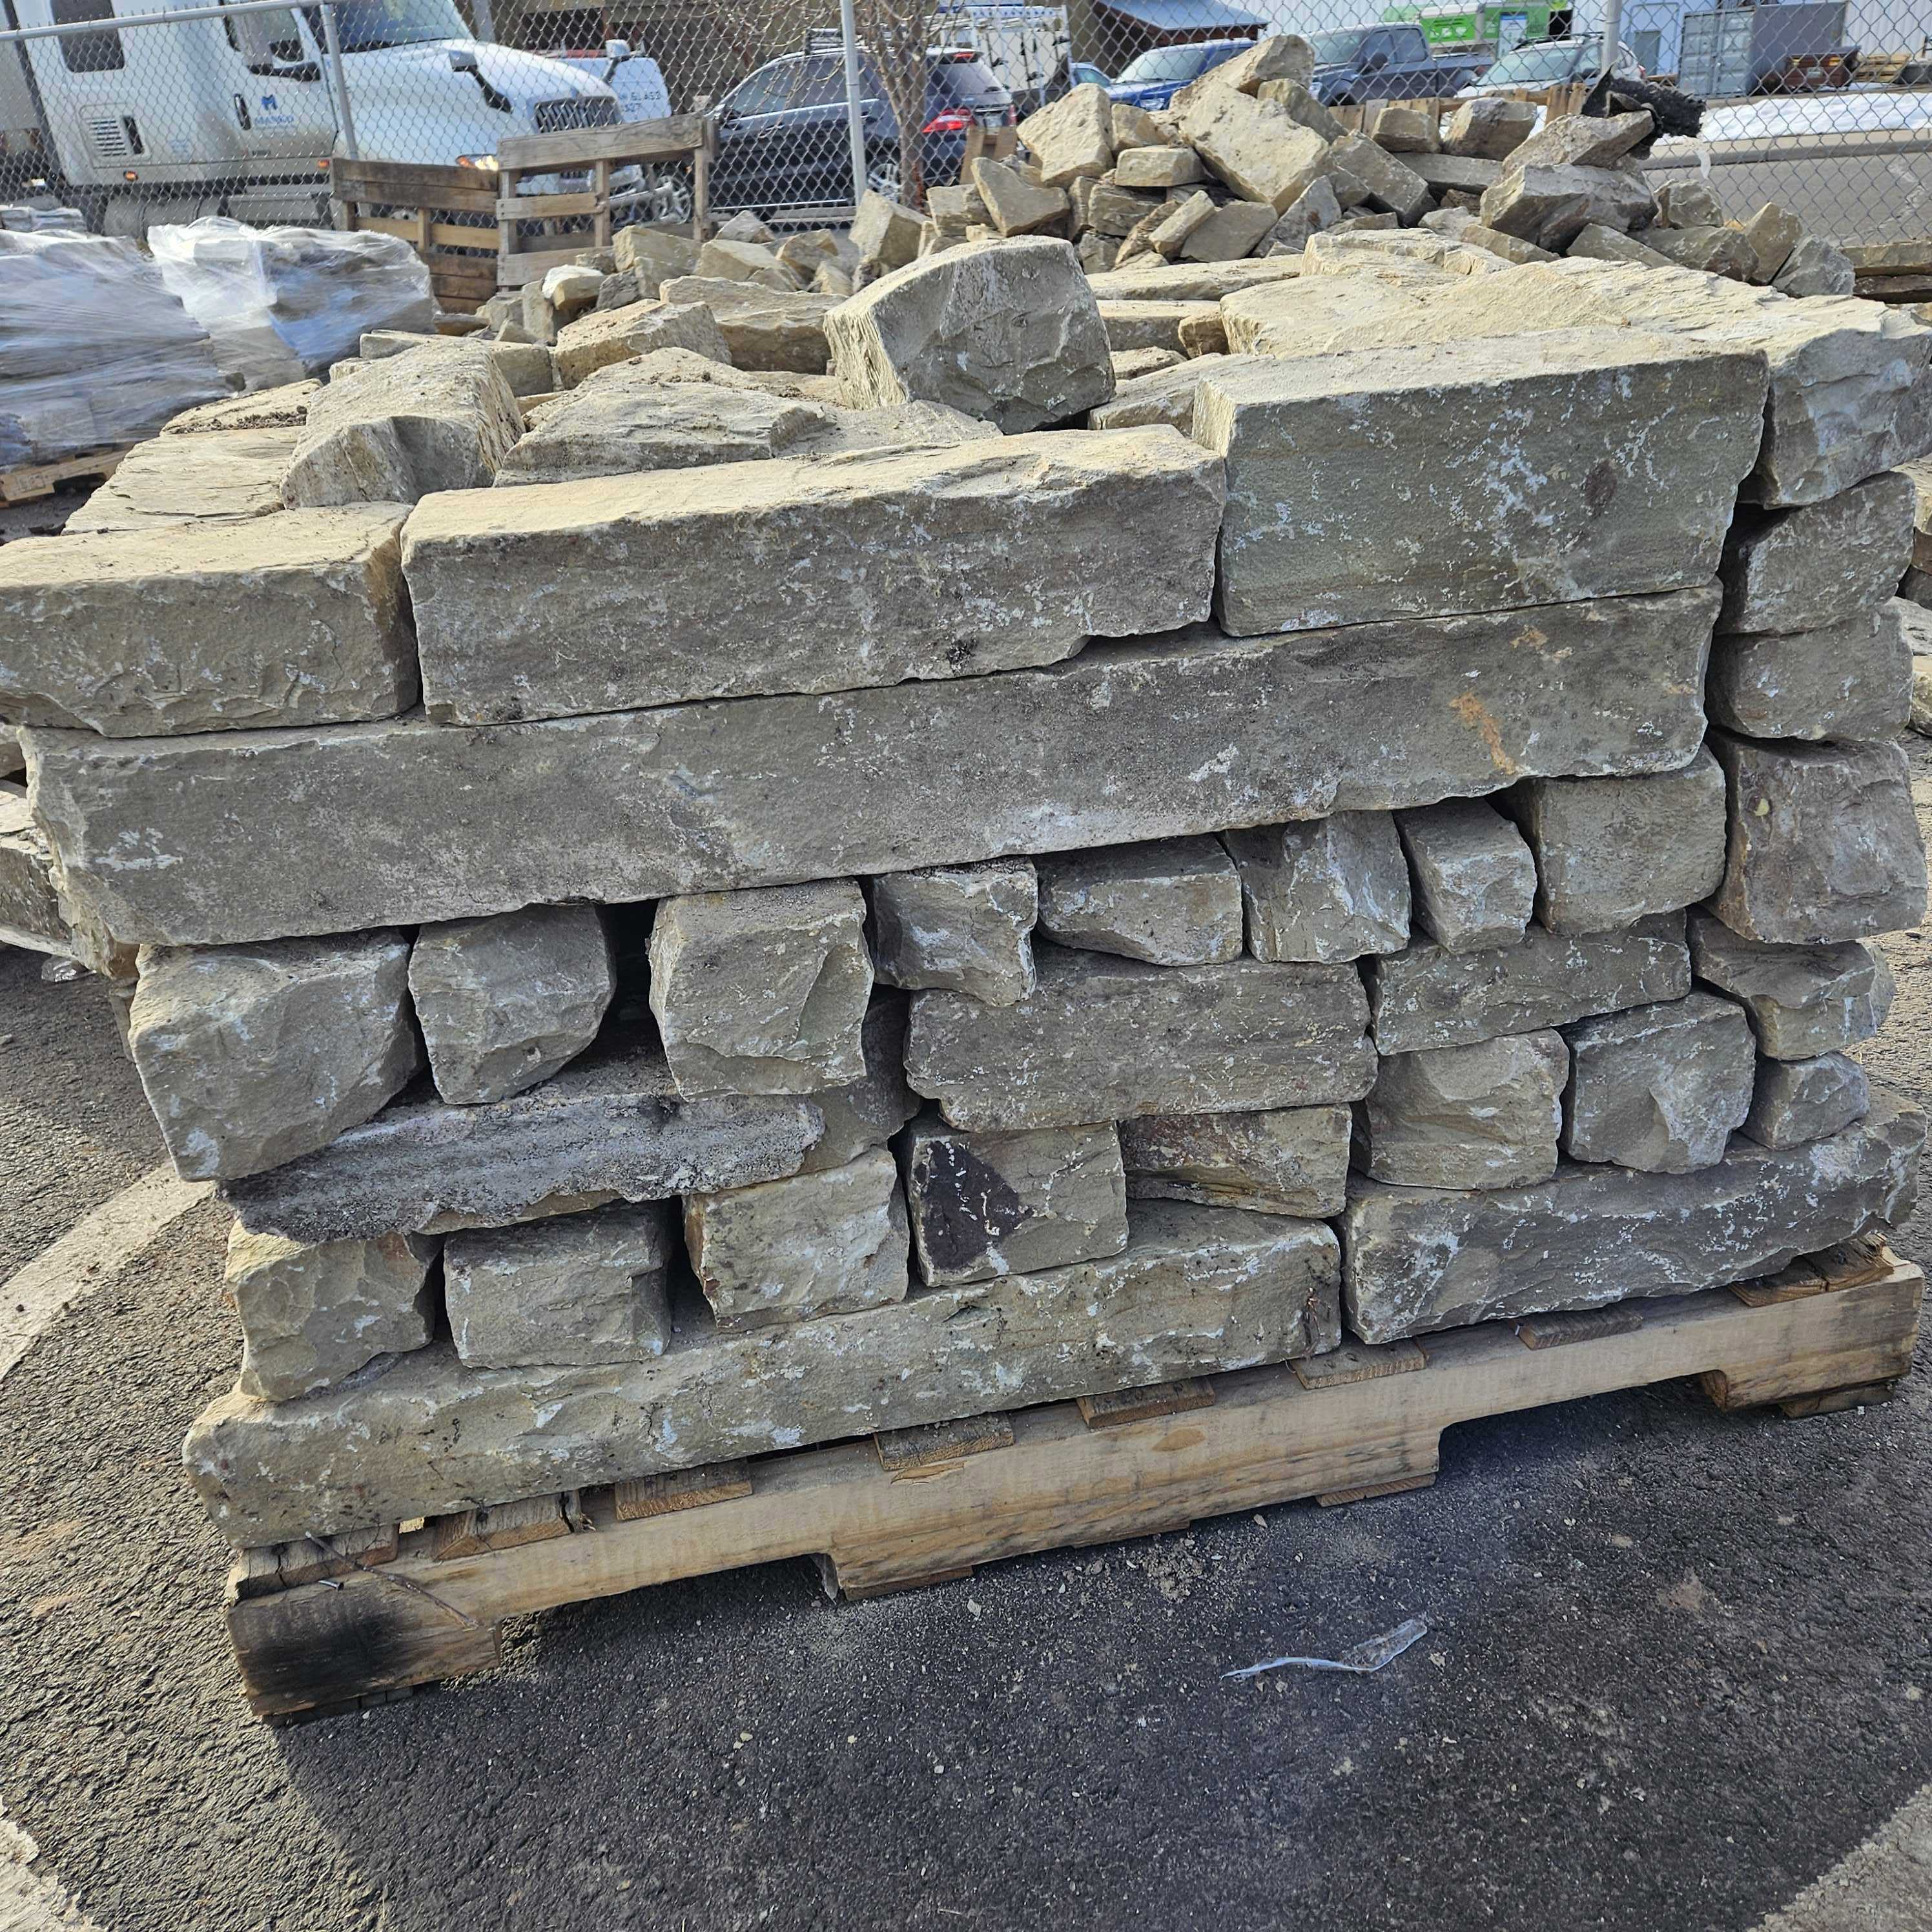 5"x 4"x Random Lengths up to 24" Approximately 1Ton Per Pallet, Rustic Buff Color Variations, Exterior Ledgestone